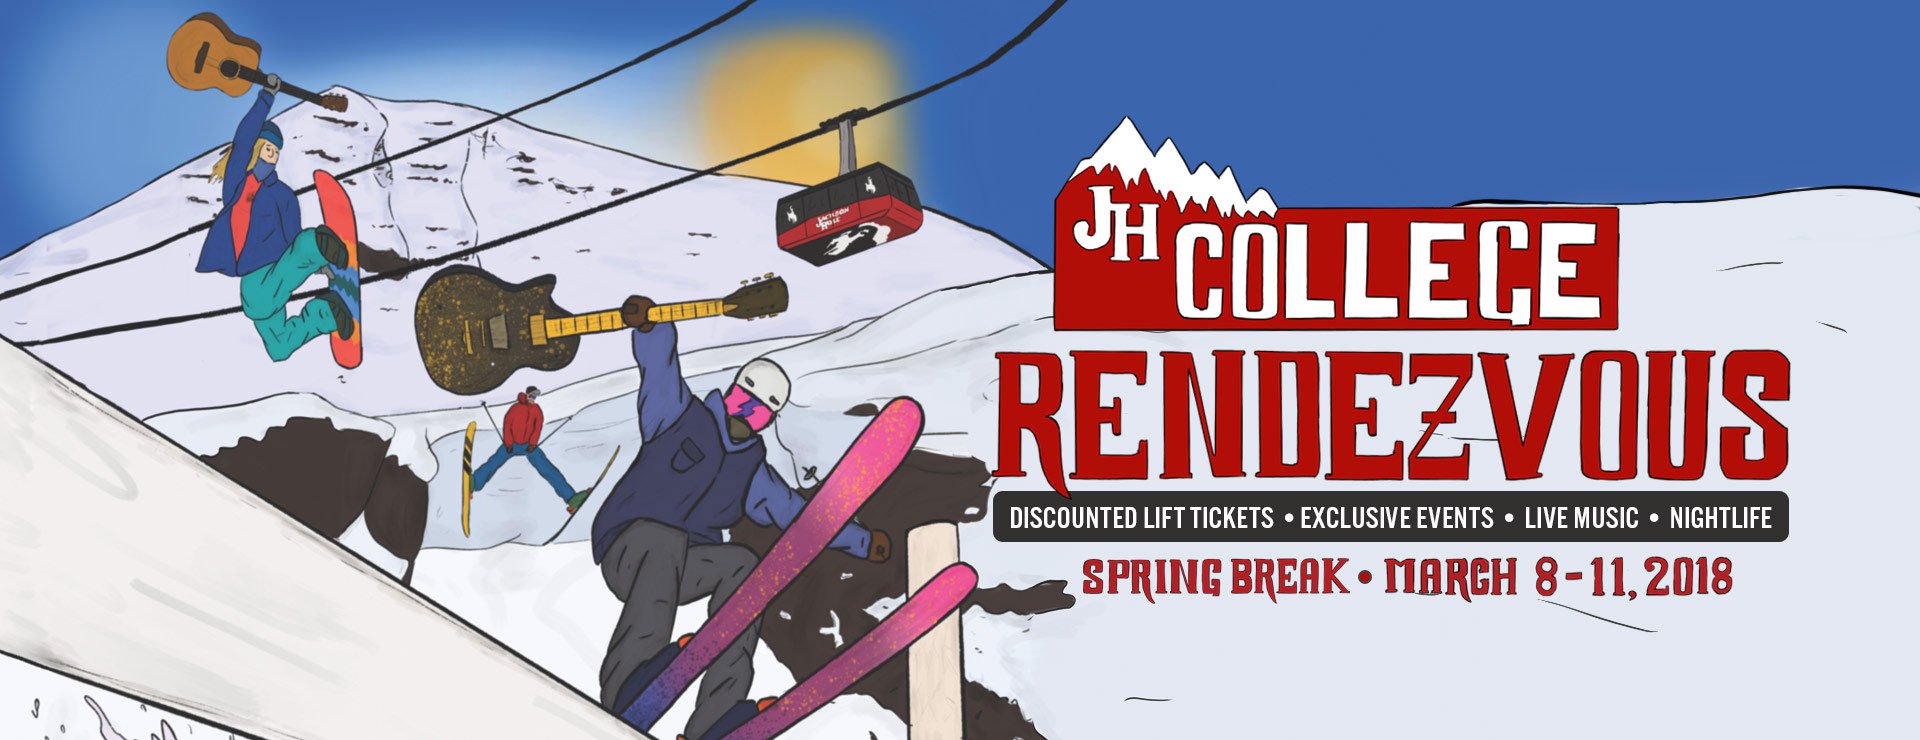 Advertisement for Jackson Hole college Rendezvous 2018